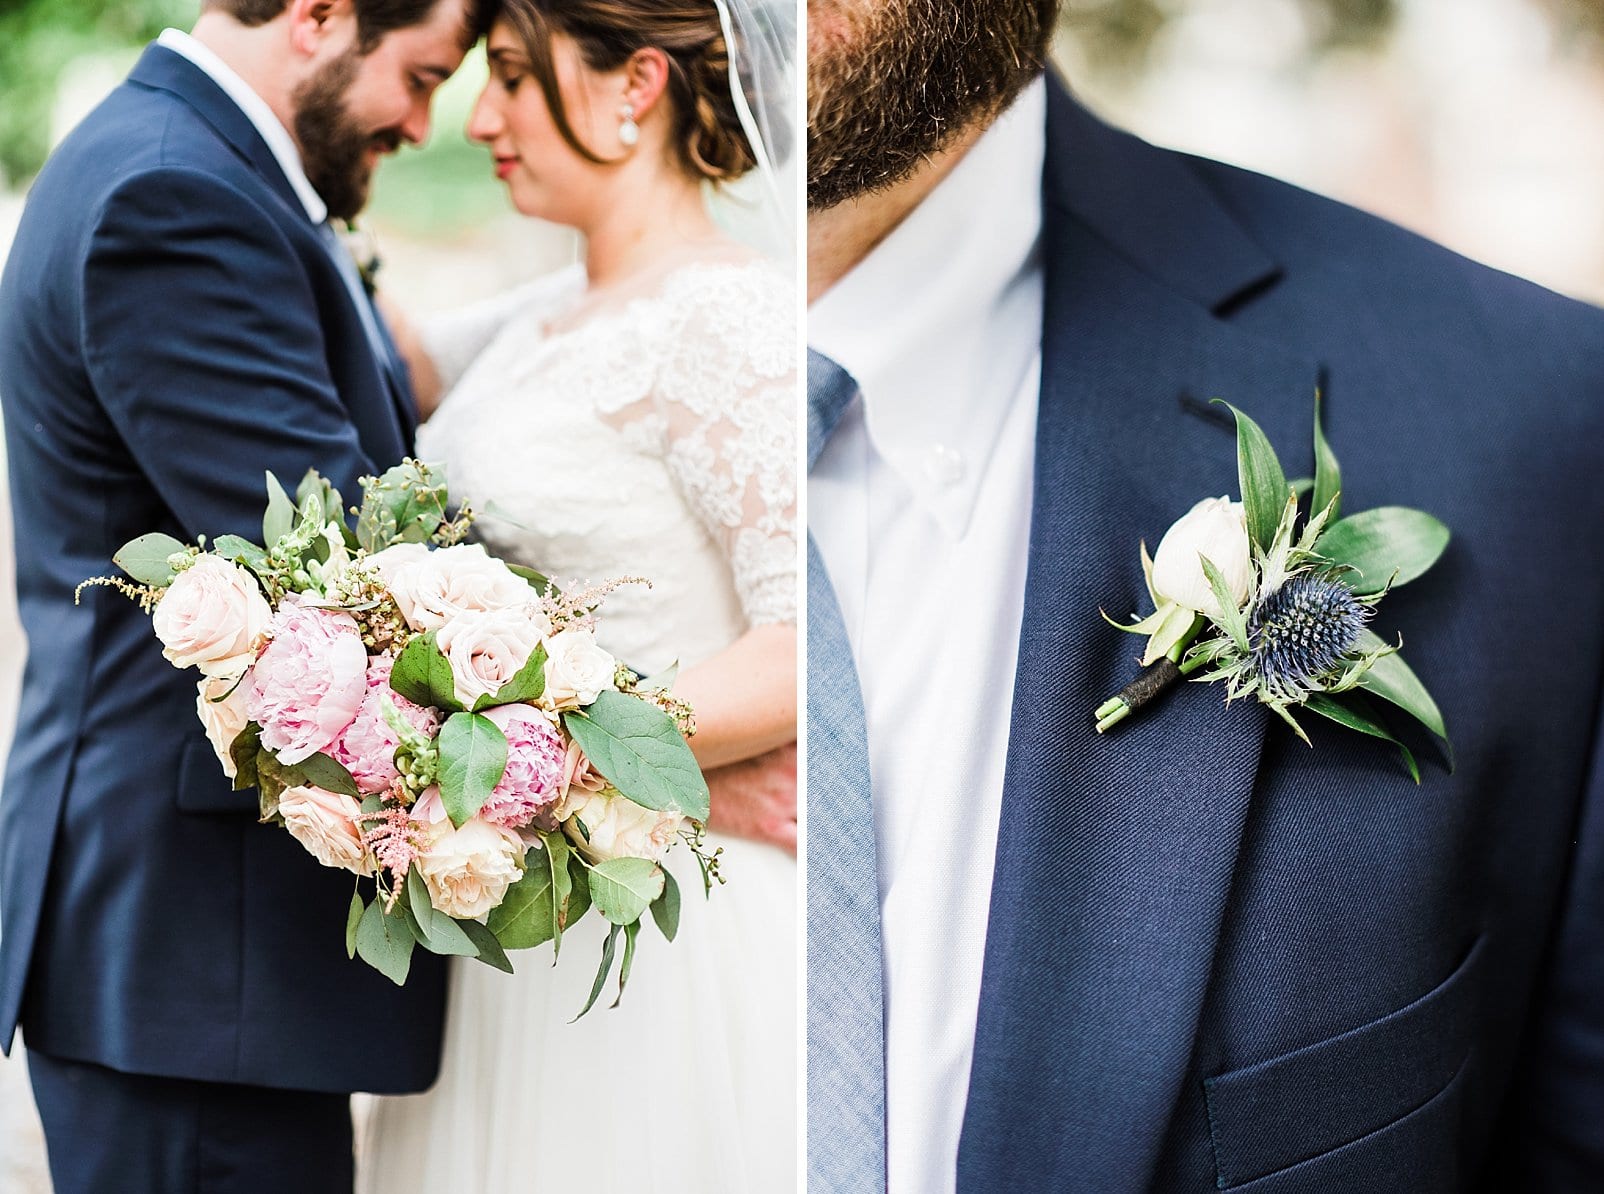 bushel and peck designs bridal bouquet and groom boutonniere with light pink flowers photo